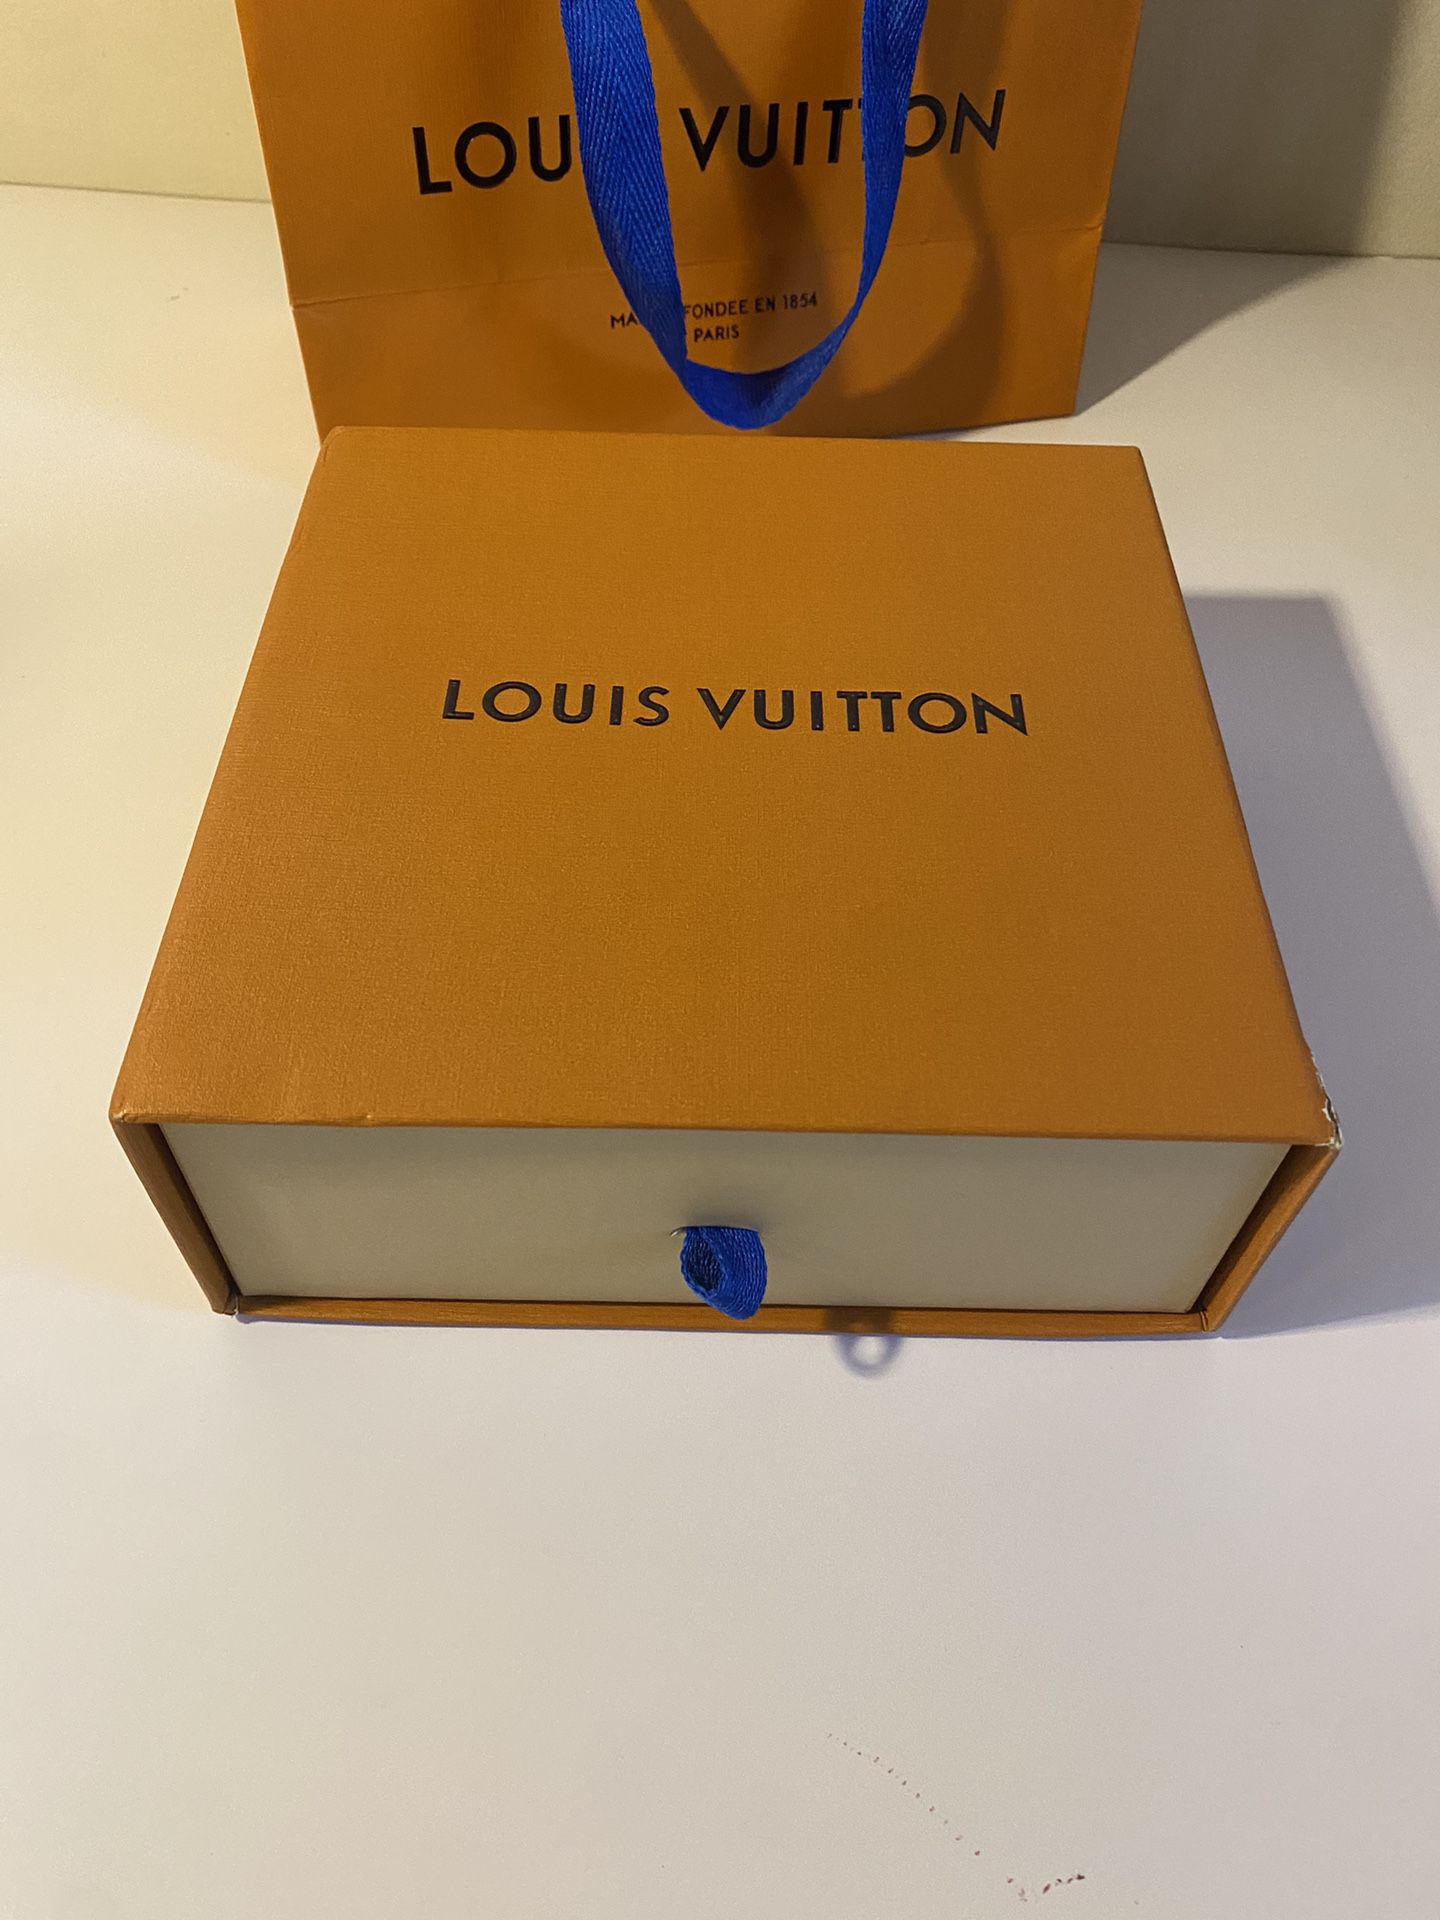 Black Checkered Silver LV Belt By Louis Vuitton – SILLY SAPP